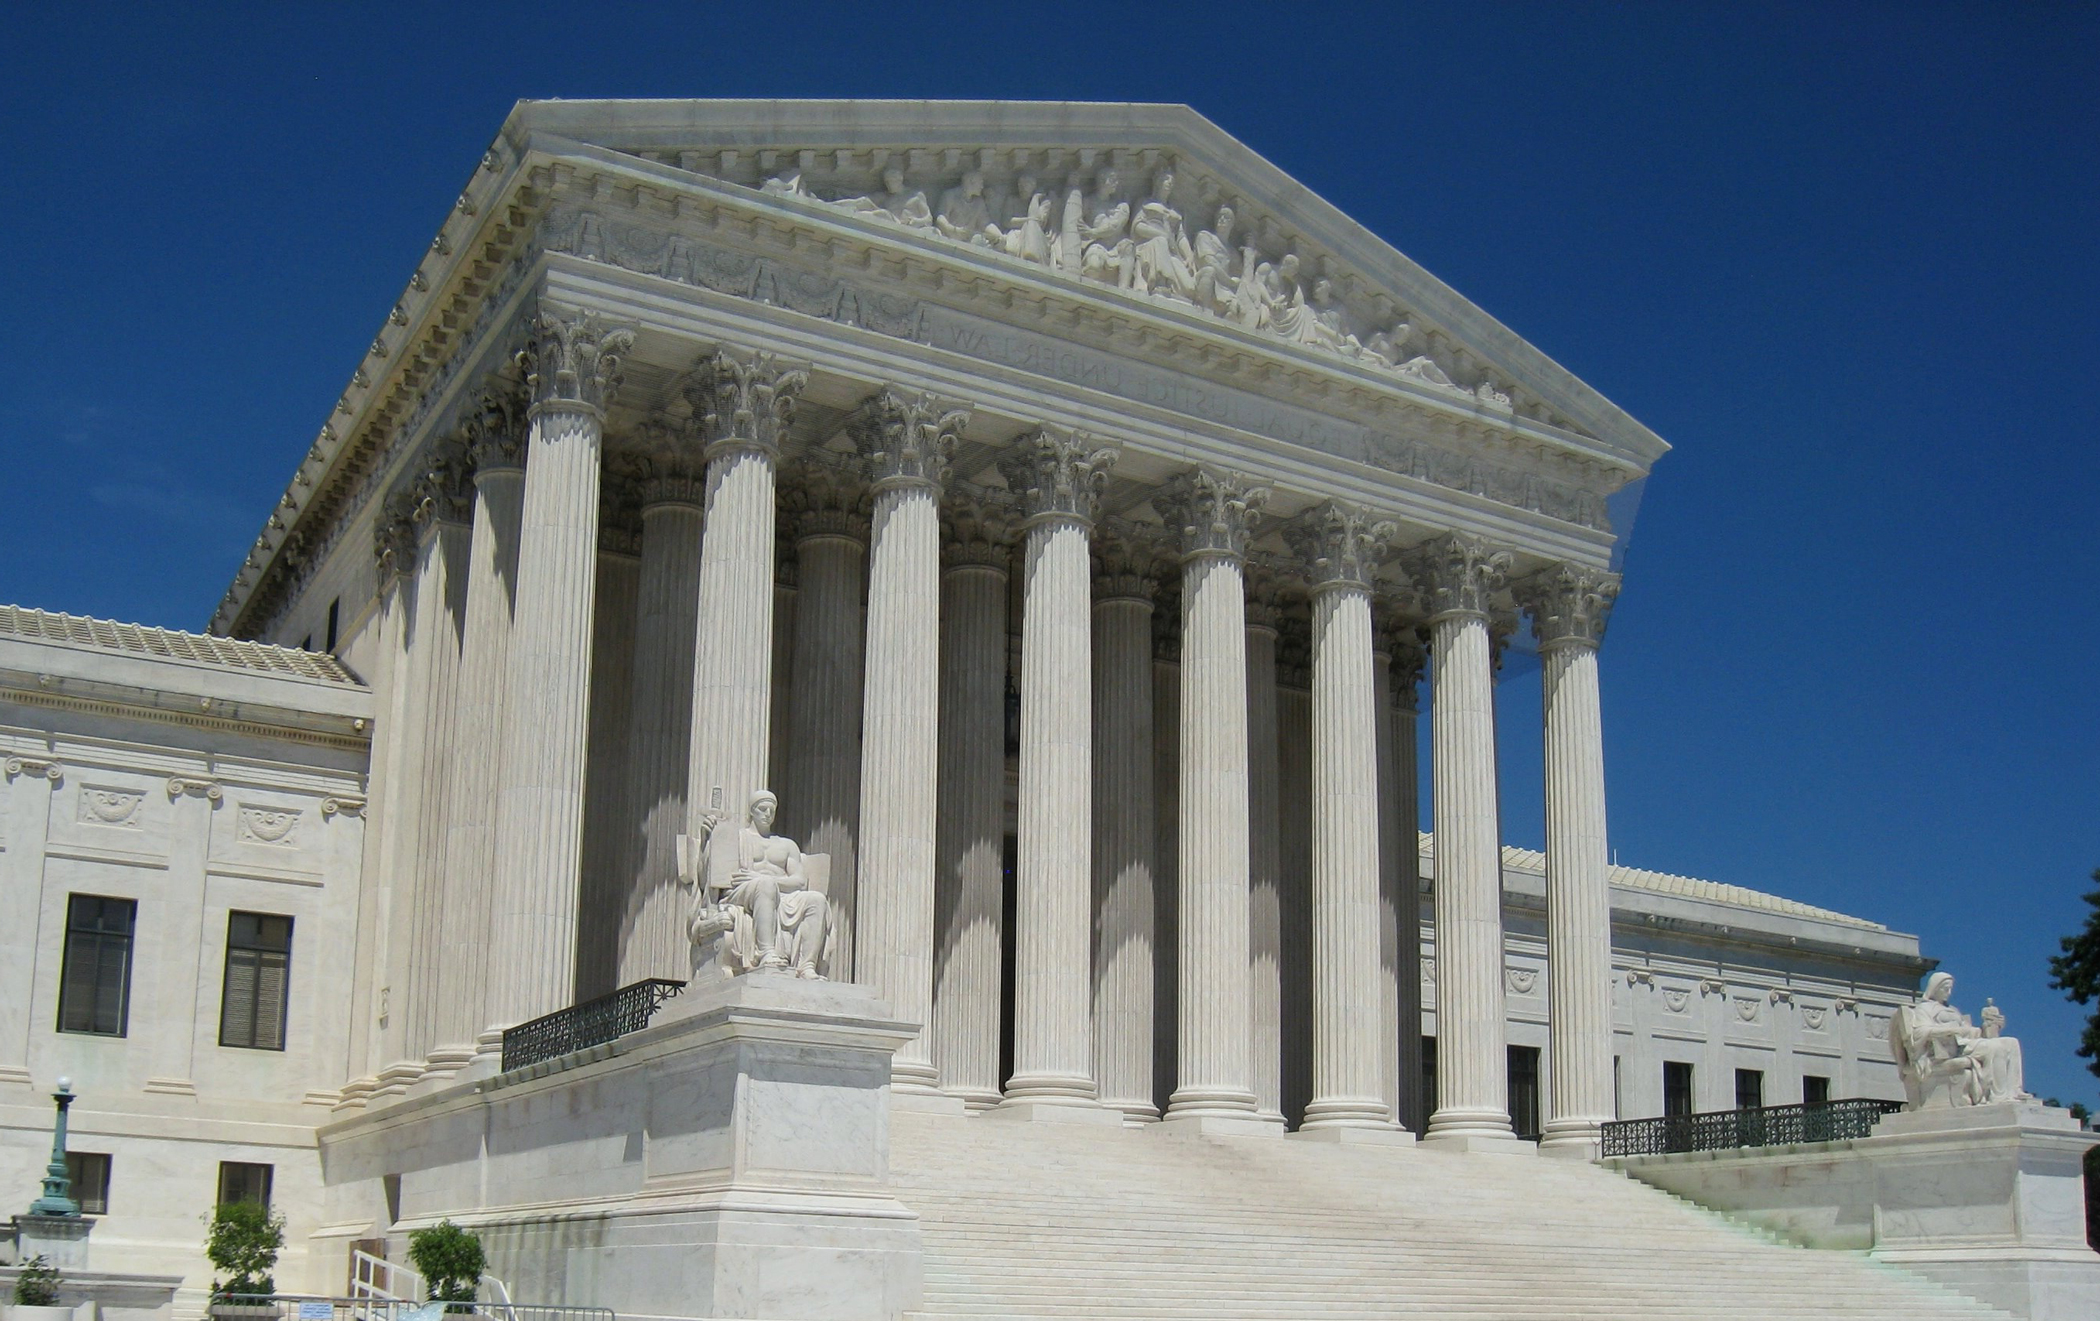 Close up angled view of the U.S. Supreme Court